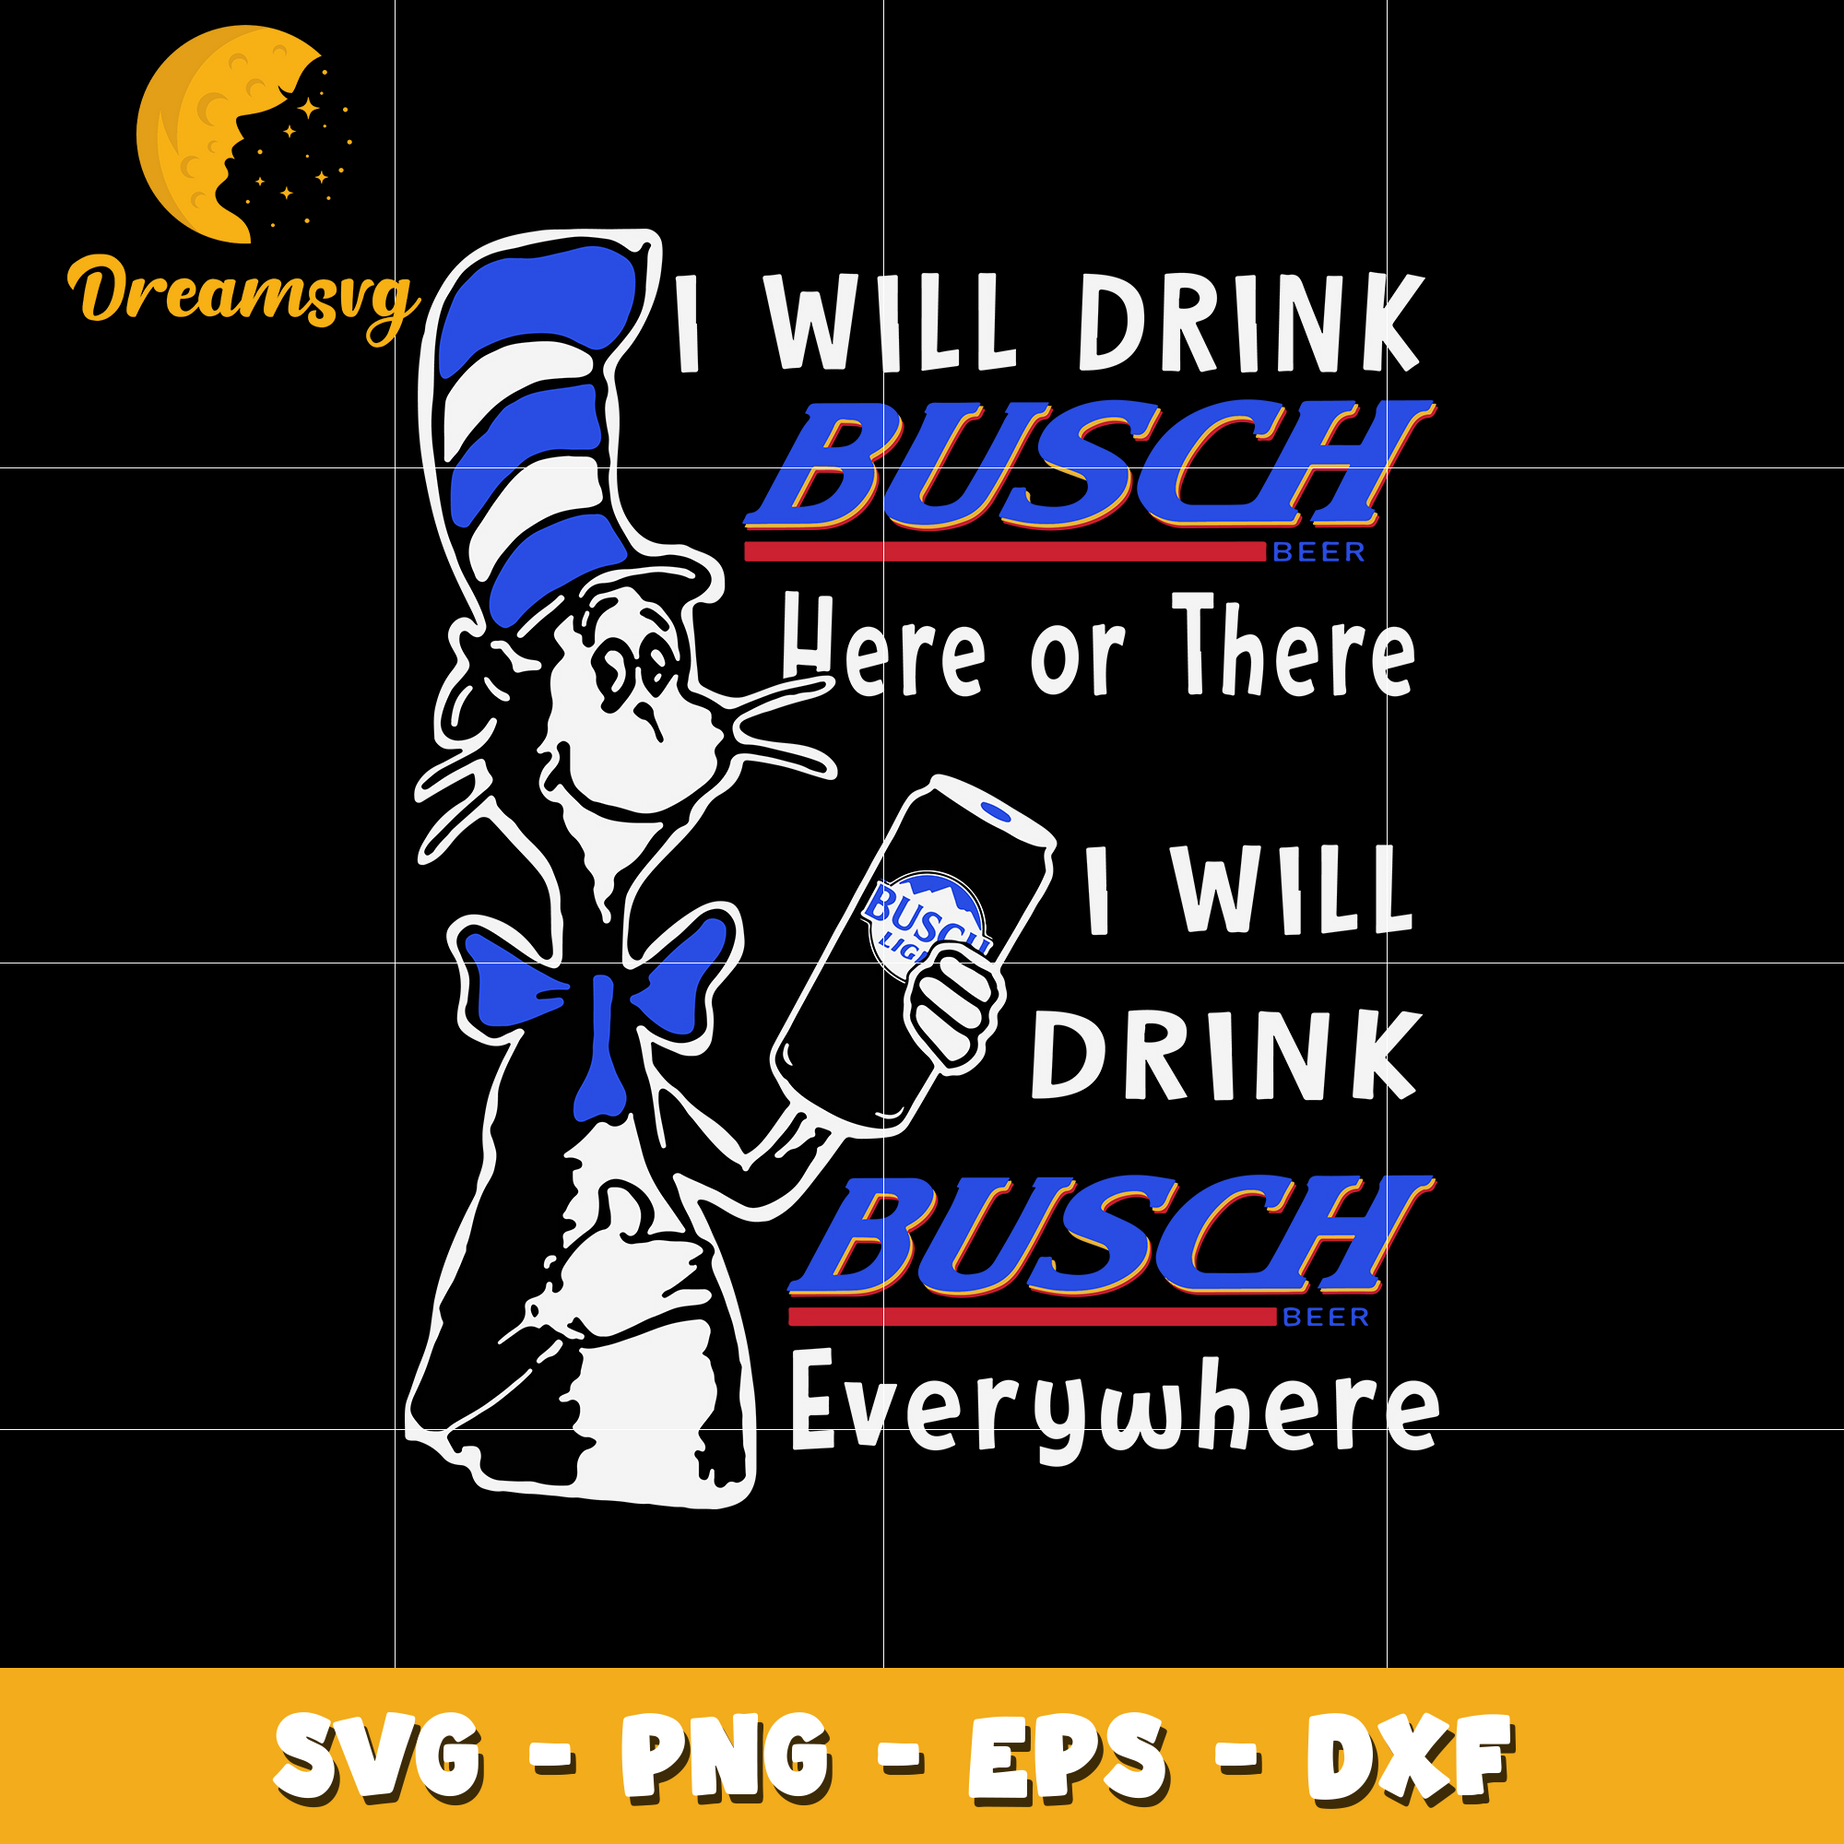 I Will Drink Busch Beer Or There I Will Drink Busch Beer Everwhere Svg